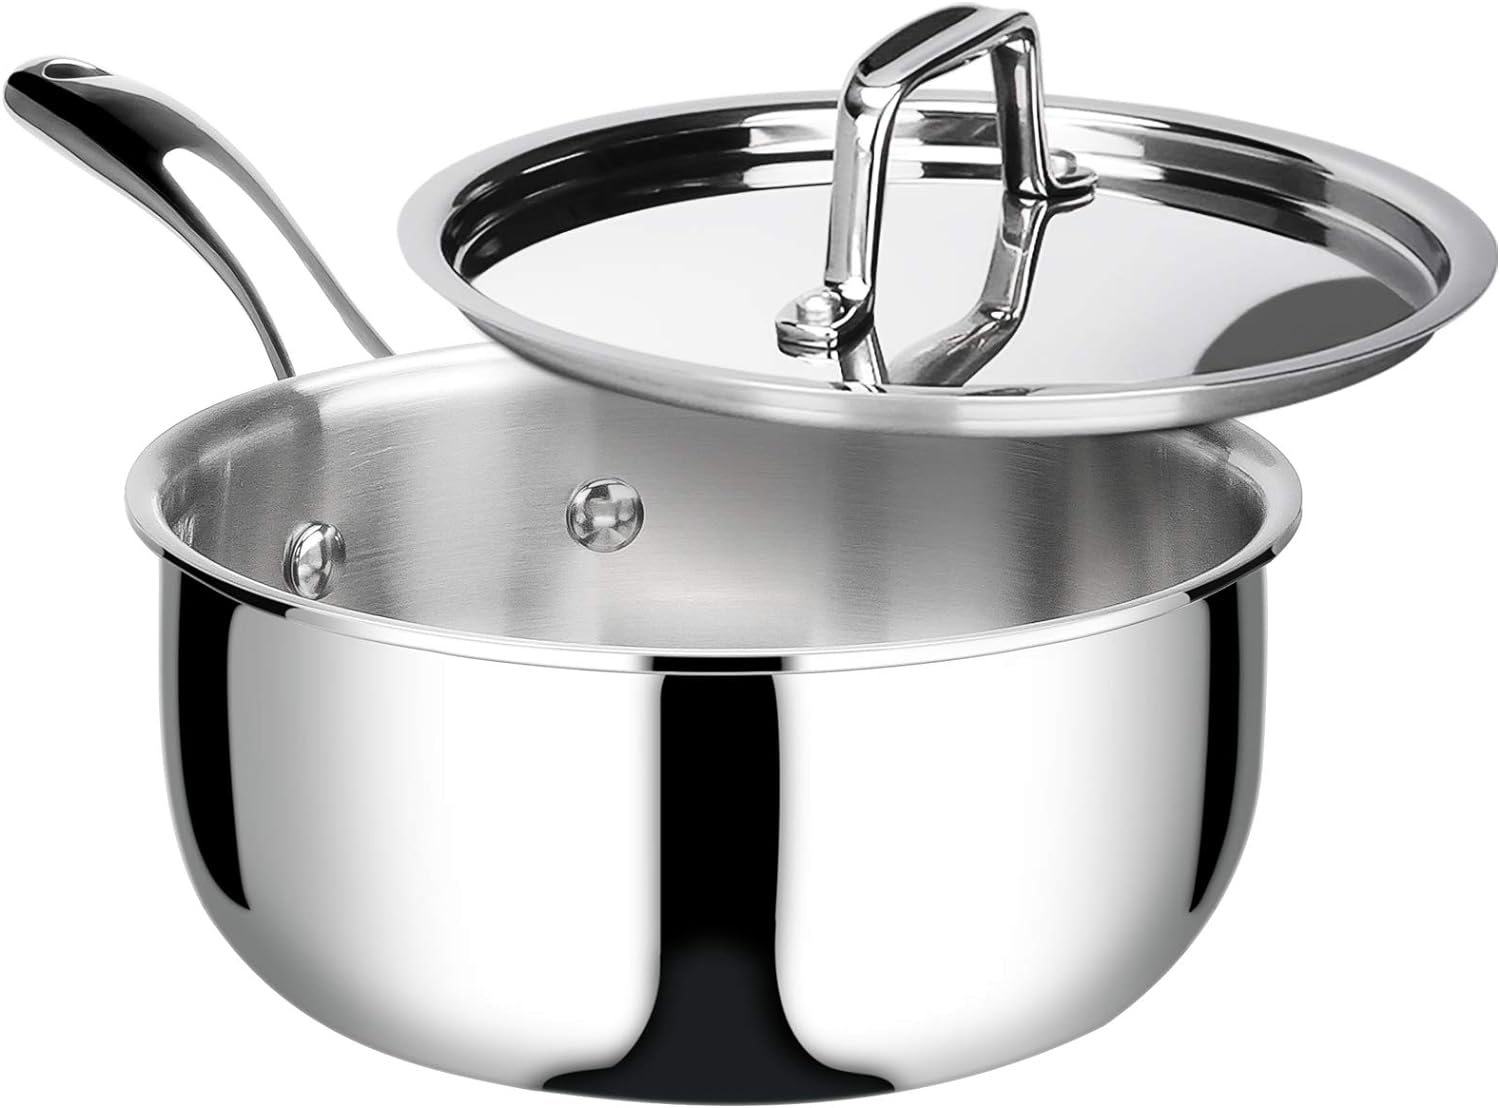 Duxtop Whole-Clad Tri-Ply Stainless Steel Saucepan with Lid